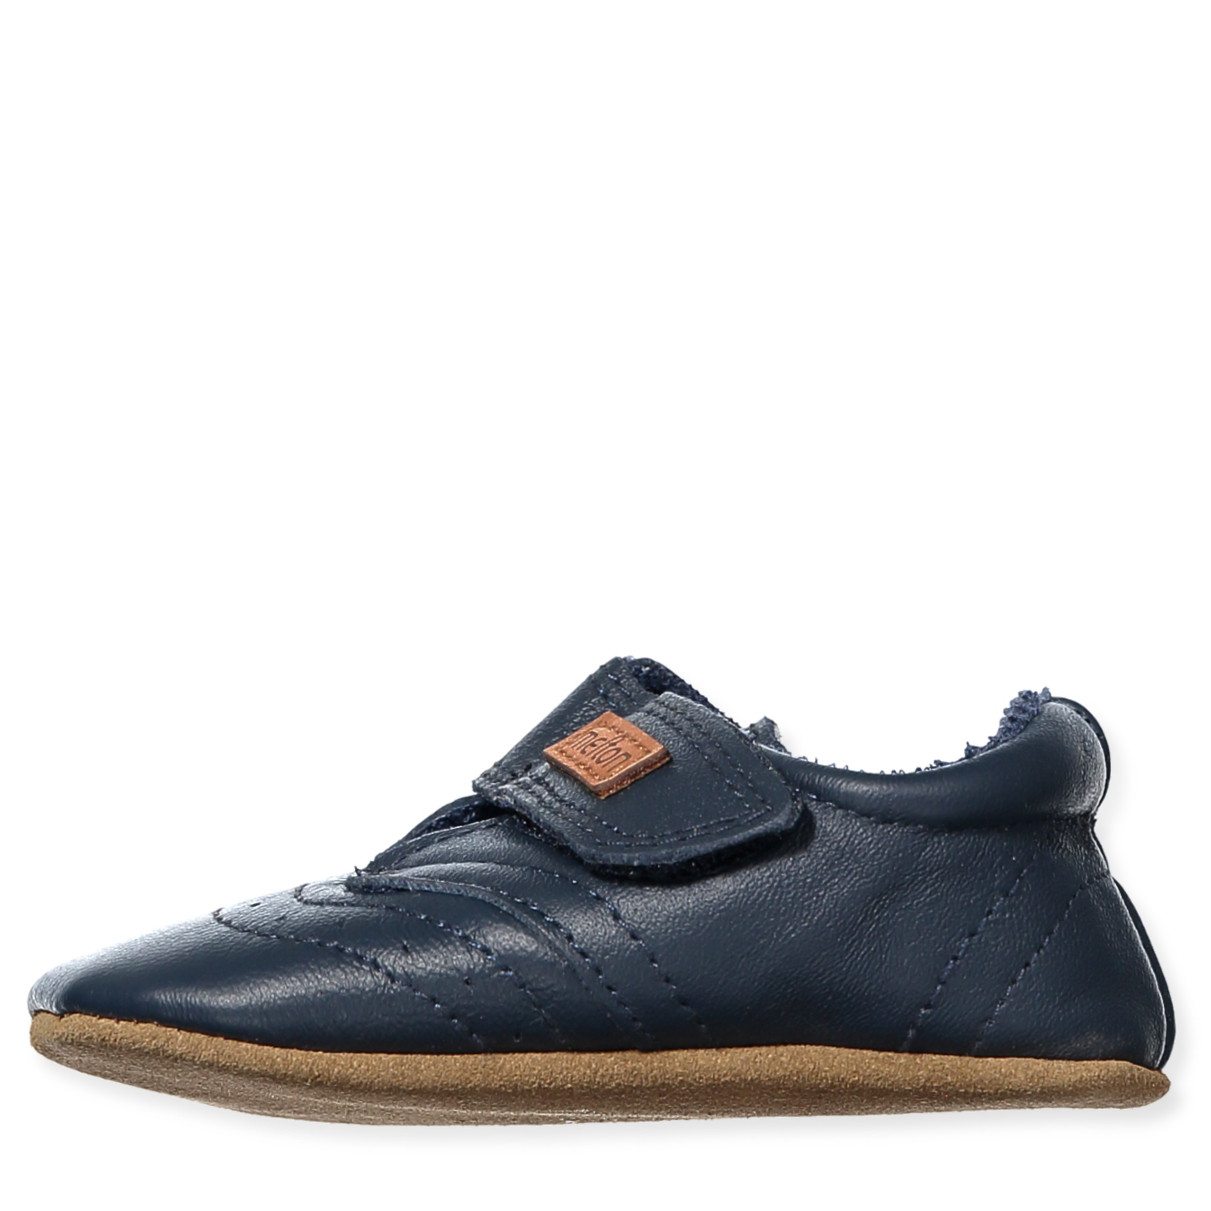 Melton - Navy leather baby shoes - Navy 